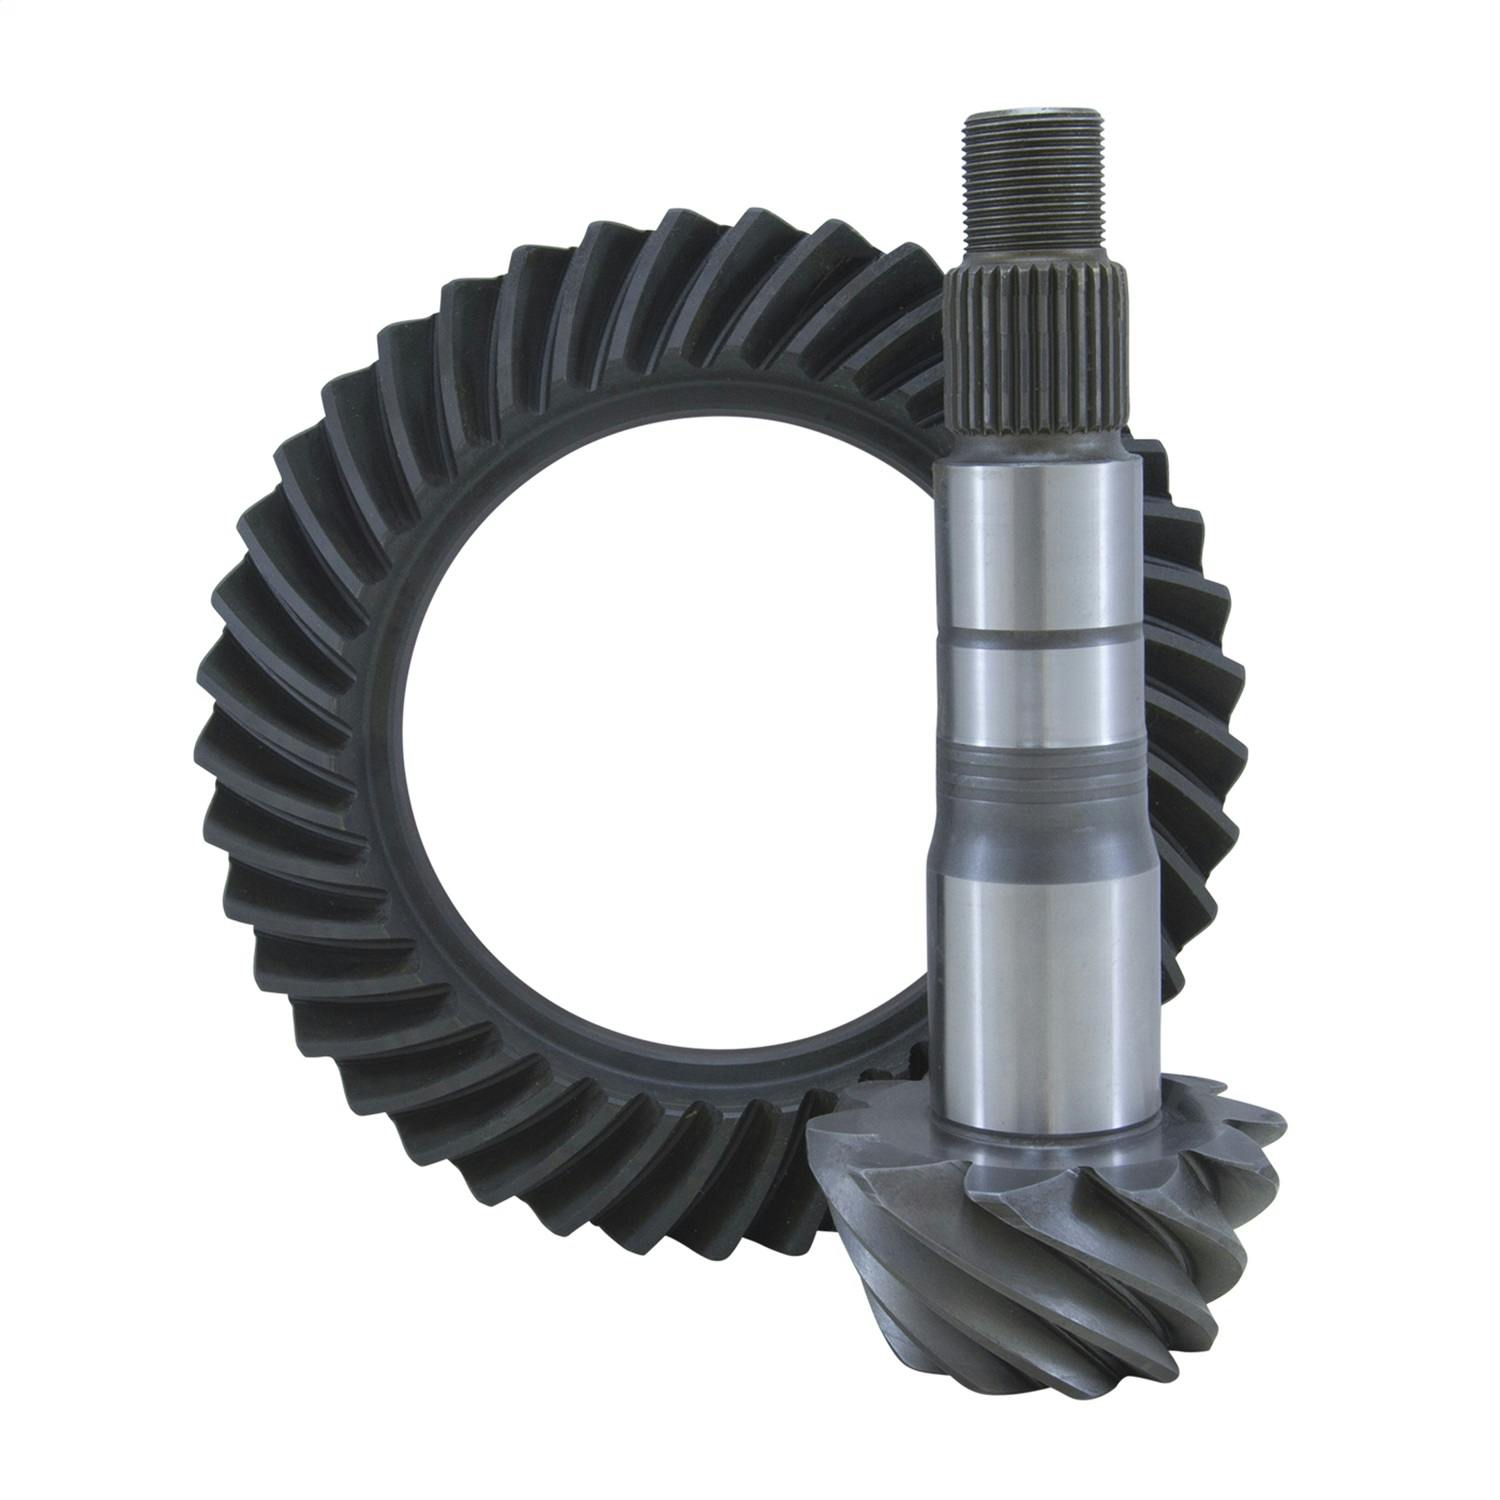 USA Standard Gear ZG T100-488 Ring And Pinion